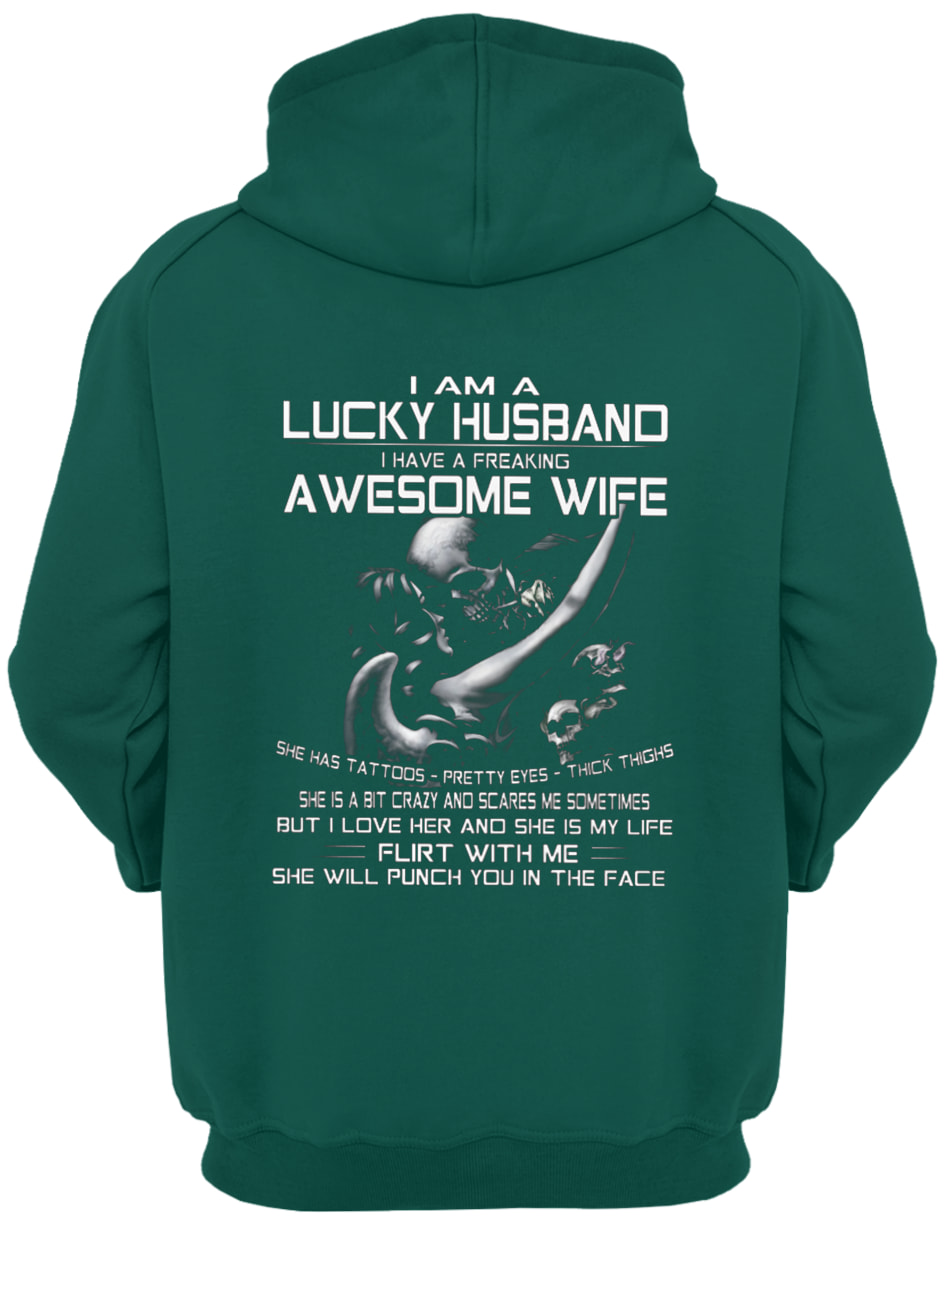 I am a lucky husband I have freaking awesome wife she has tattoos pretty eyes hoodie